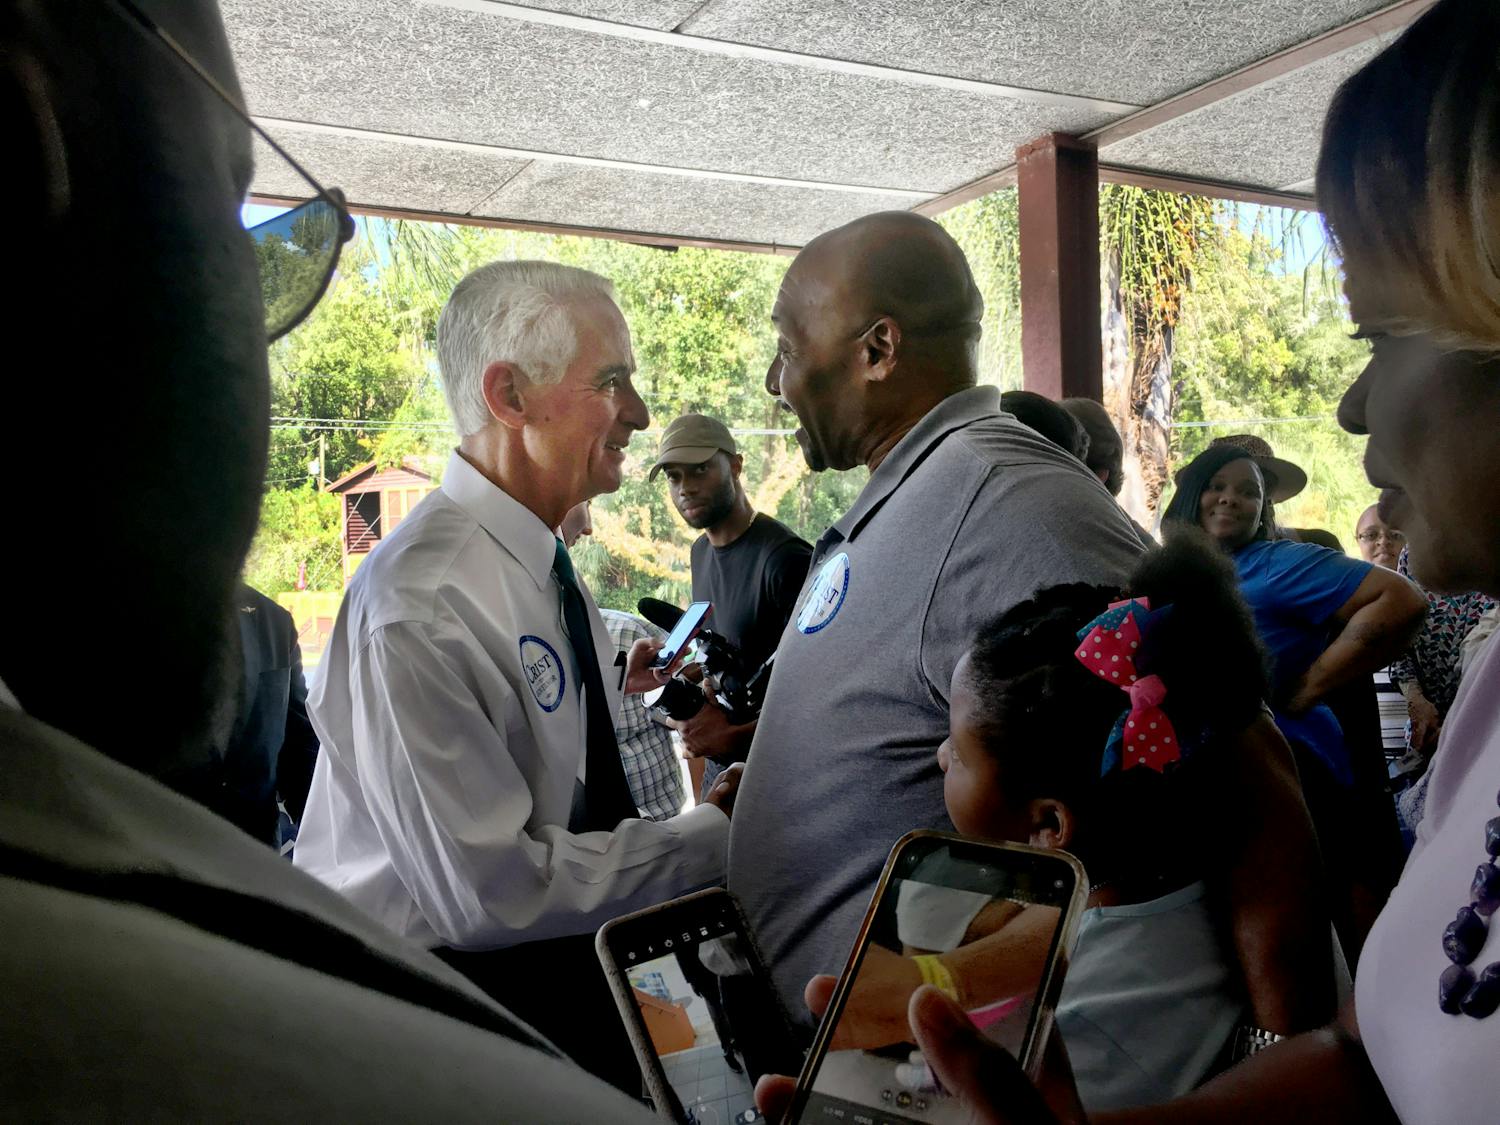 Democratic gubernatorial candidate Charlie Crist greets J.W. Honeysucker, a 58-year-old pastor at Grace United Ministries and Gainesville resident﻿, at a campaign stop at the Alachua County Democratic Headquarters Saturday, Sept. 24, 2022. “I’m supporting him for the stance and the platform he’s running on,” Honeysucker said.